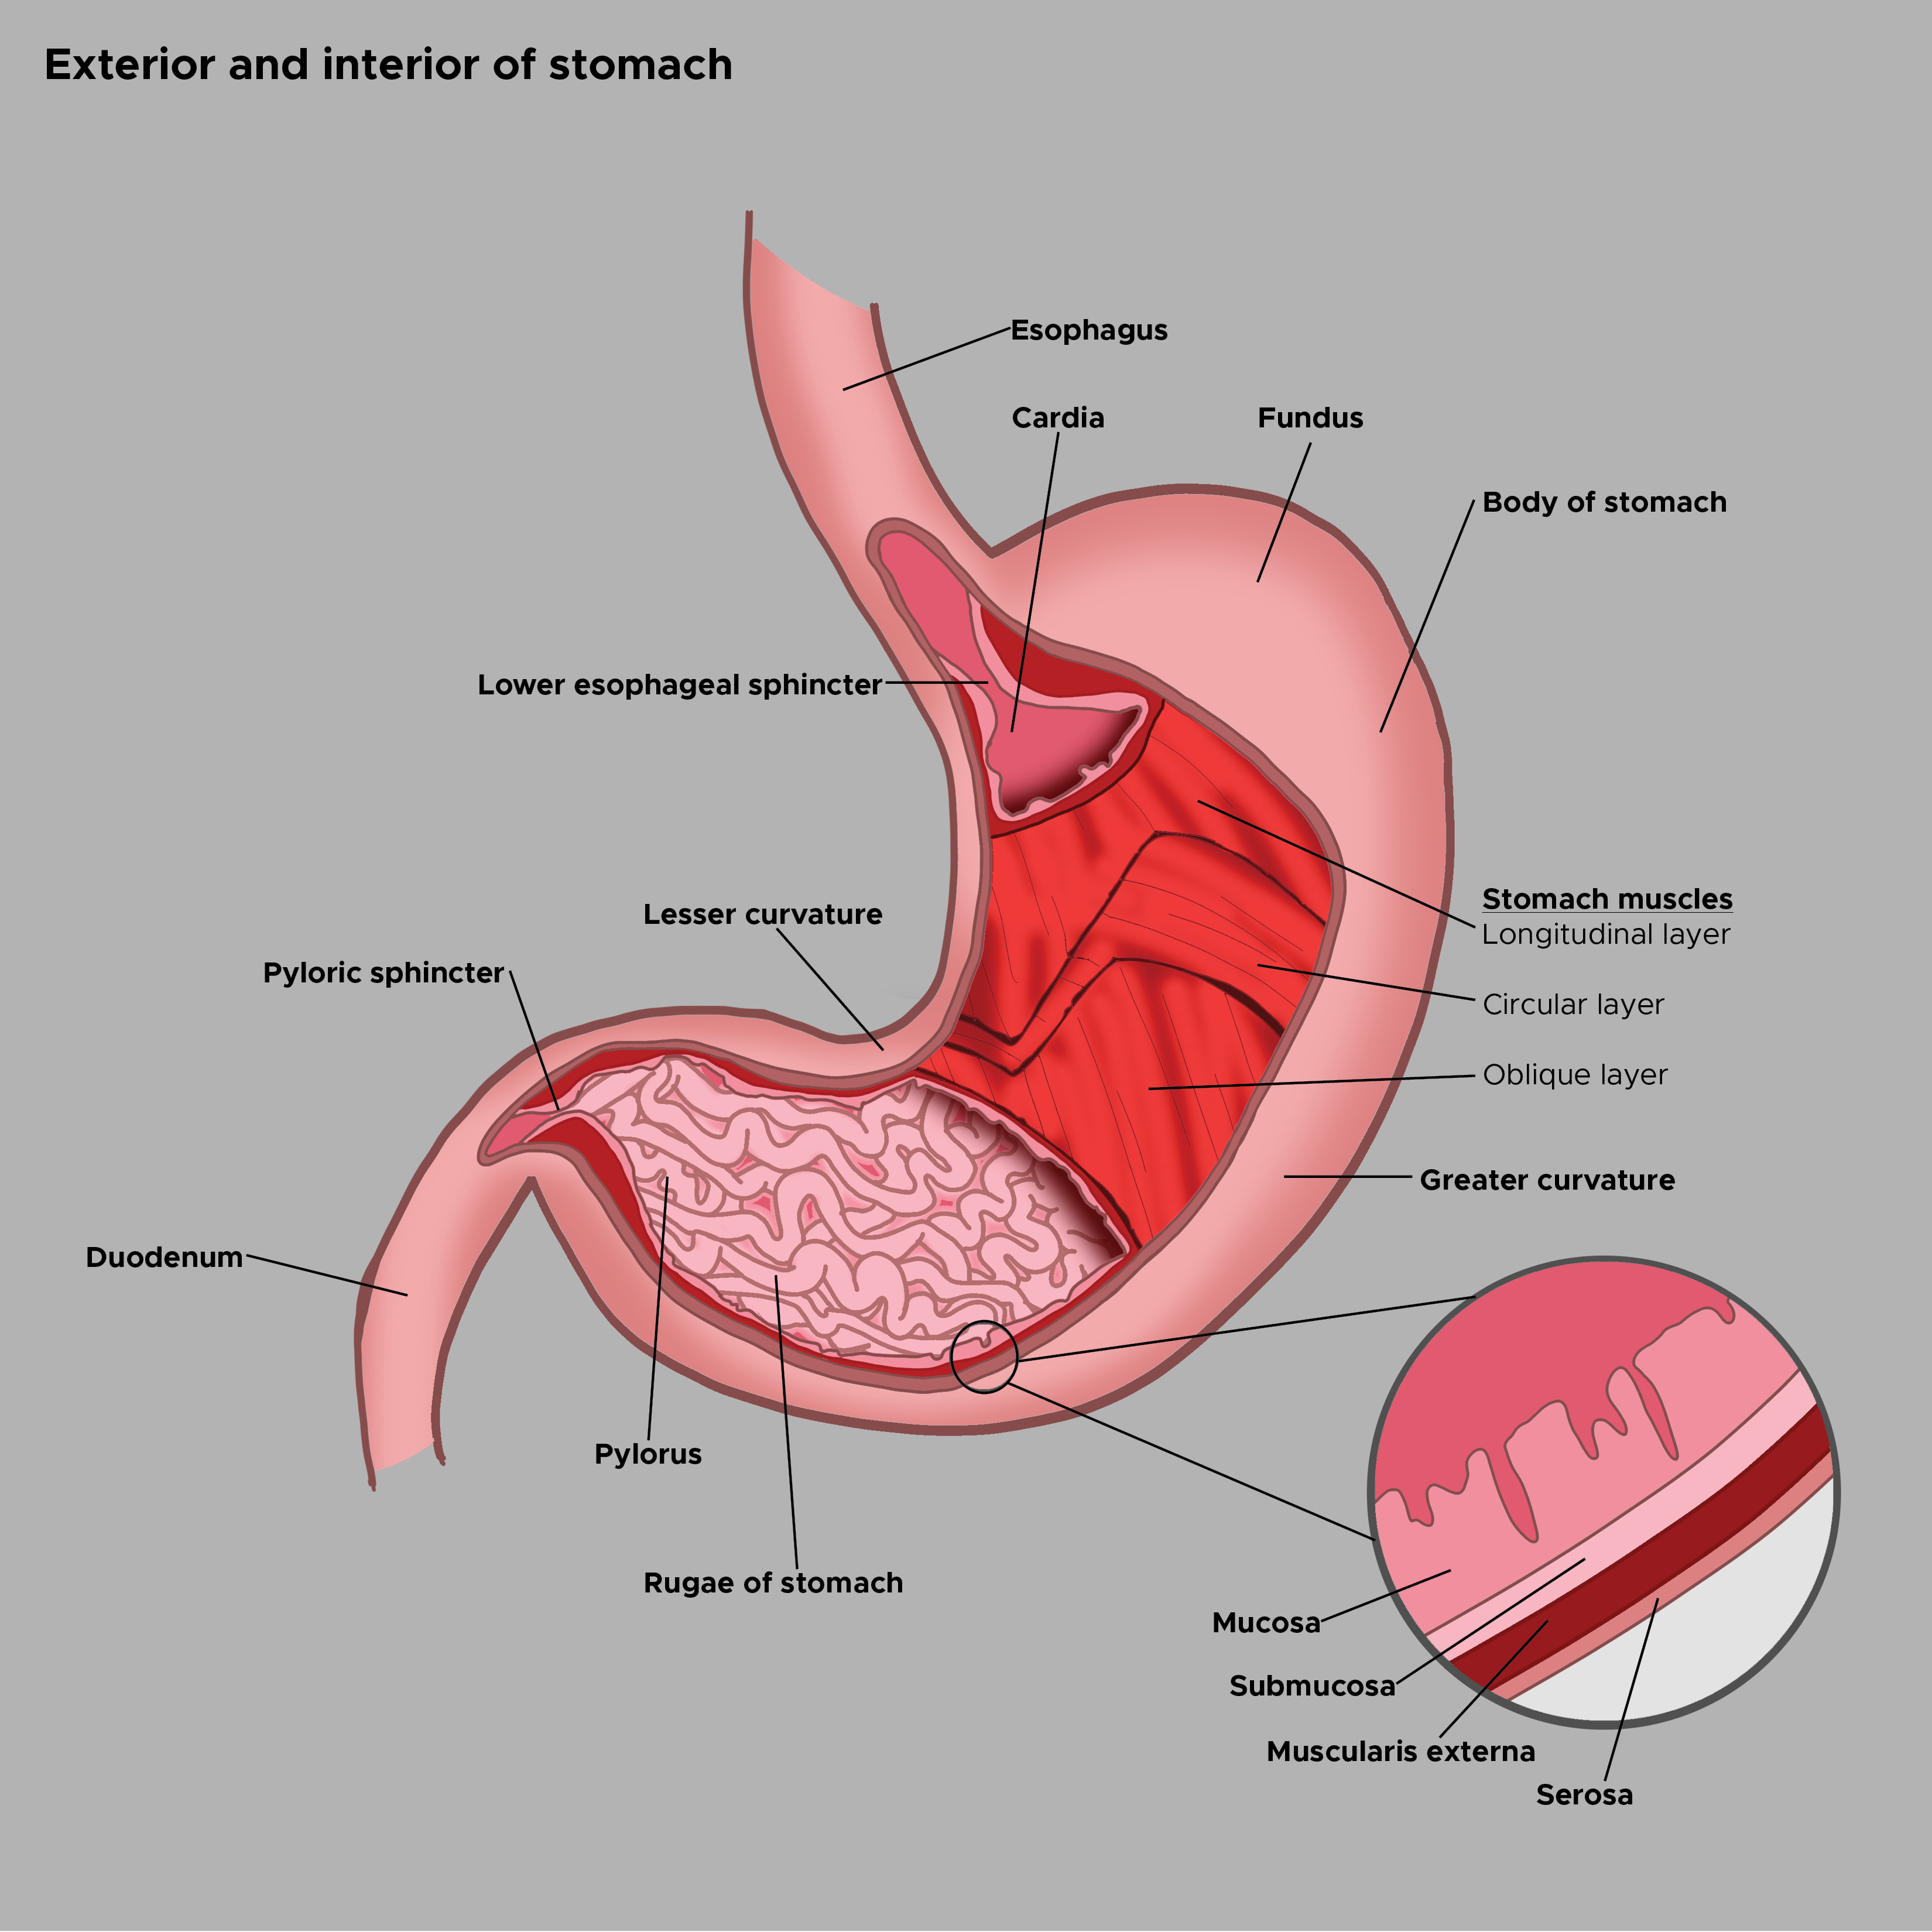 <p>Exterior and Interior of the Stomach